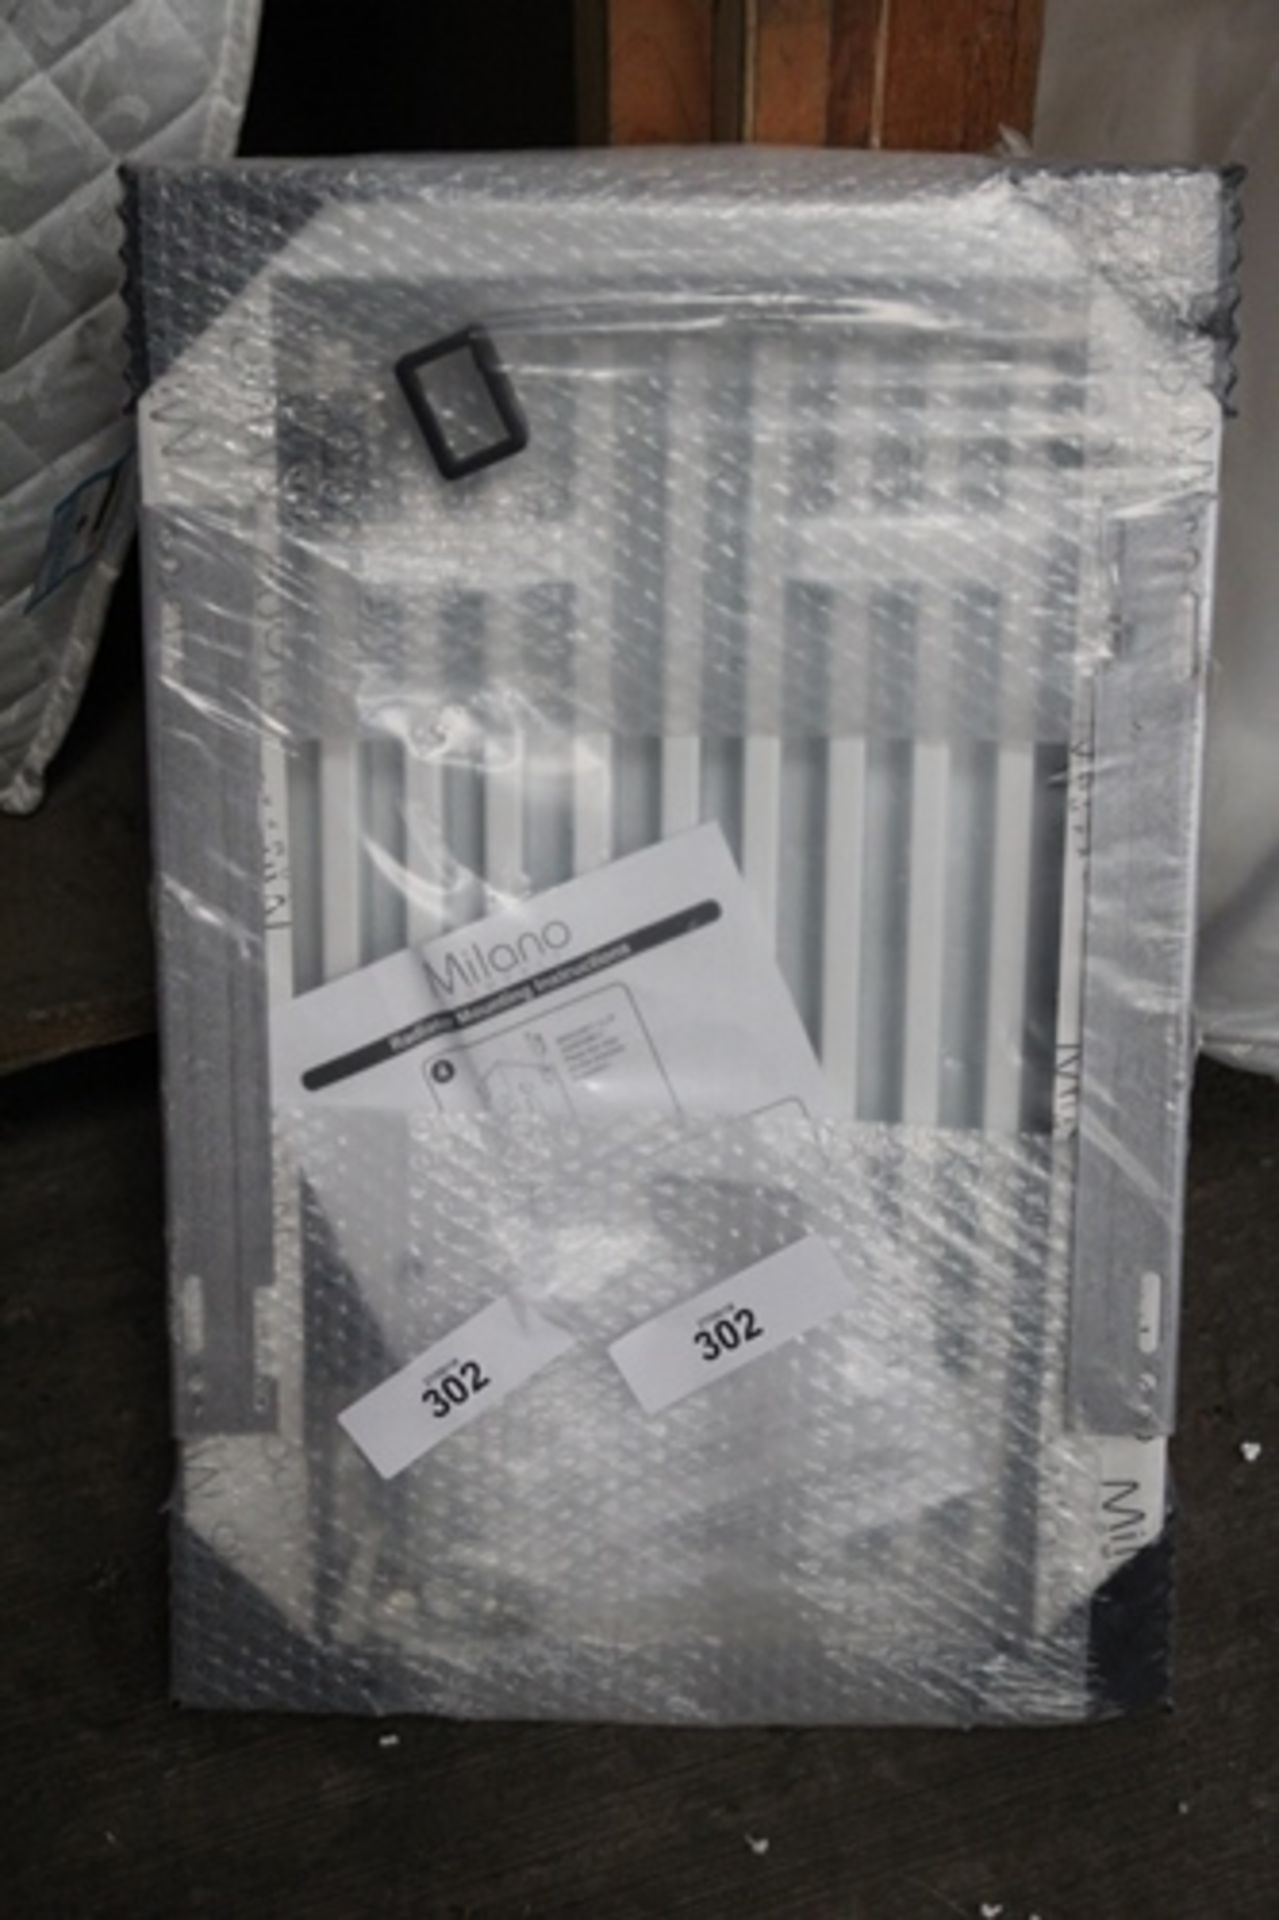 Milano compact radiator, 600mm x 400mm, Ref: 005668107 - Sealed new in pack (B27)